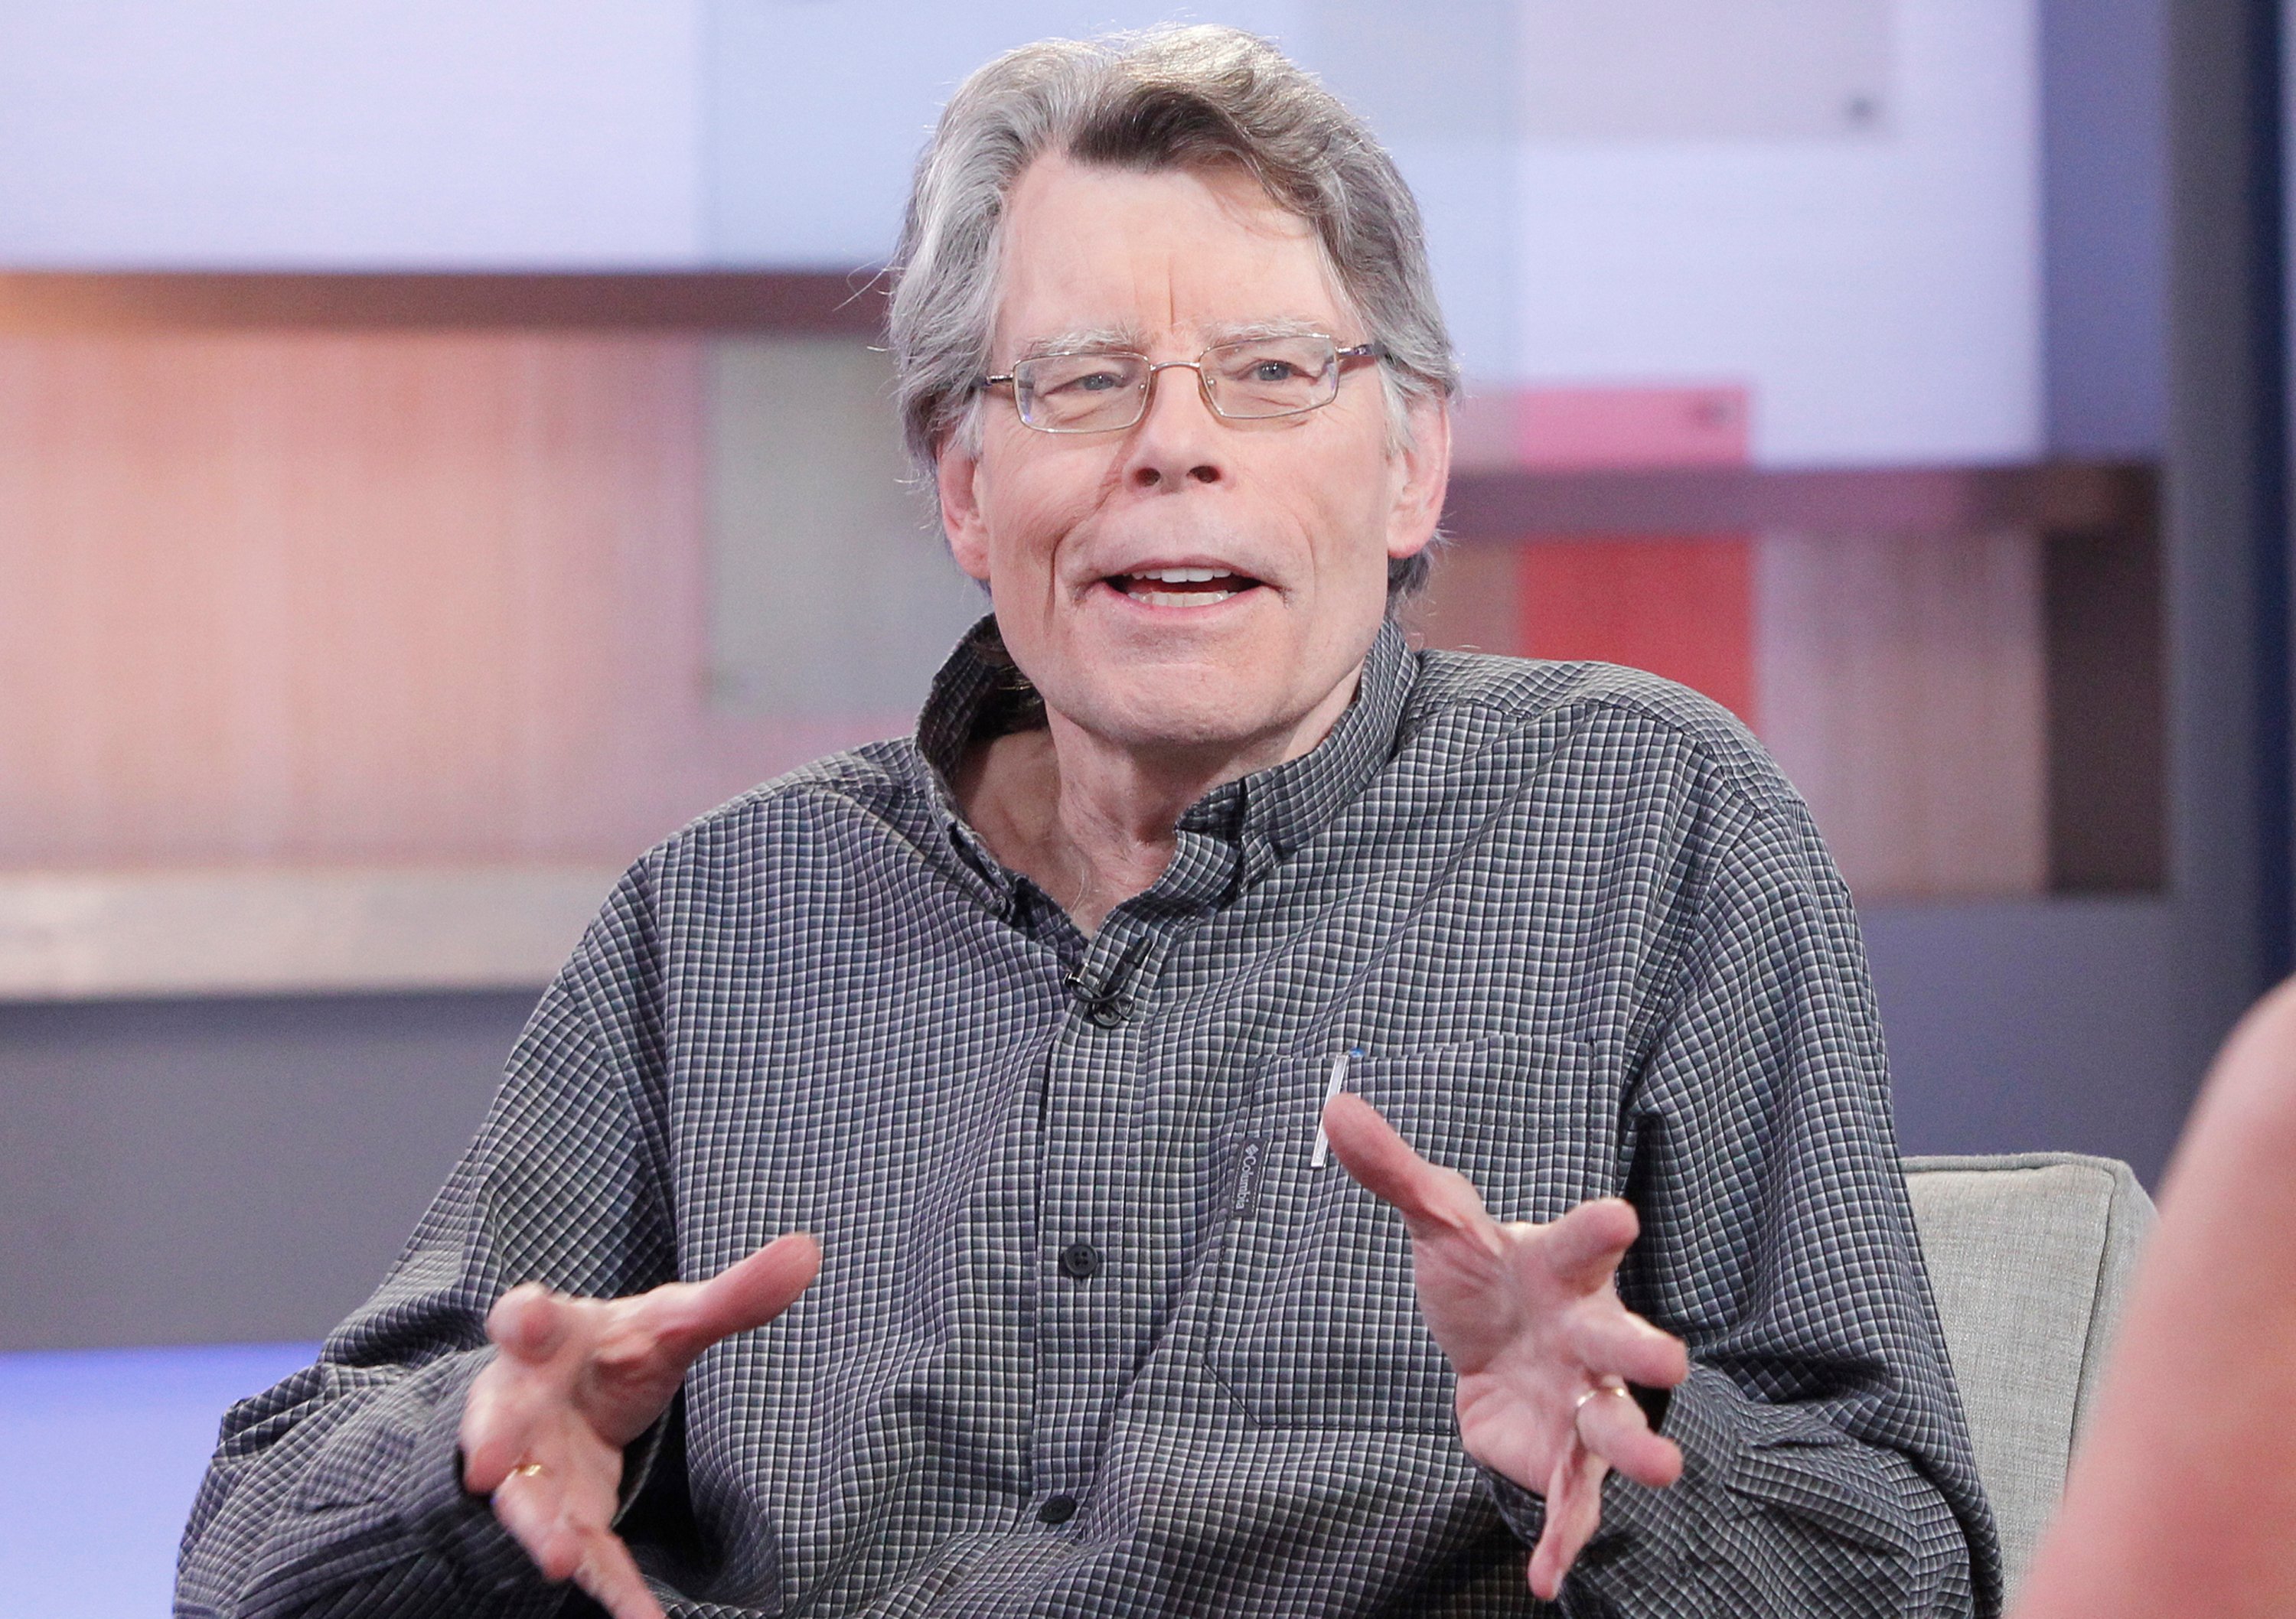 Author Stephen King makes an appearance on Good Morning America in 2015